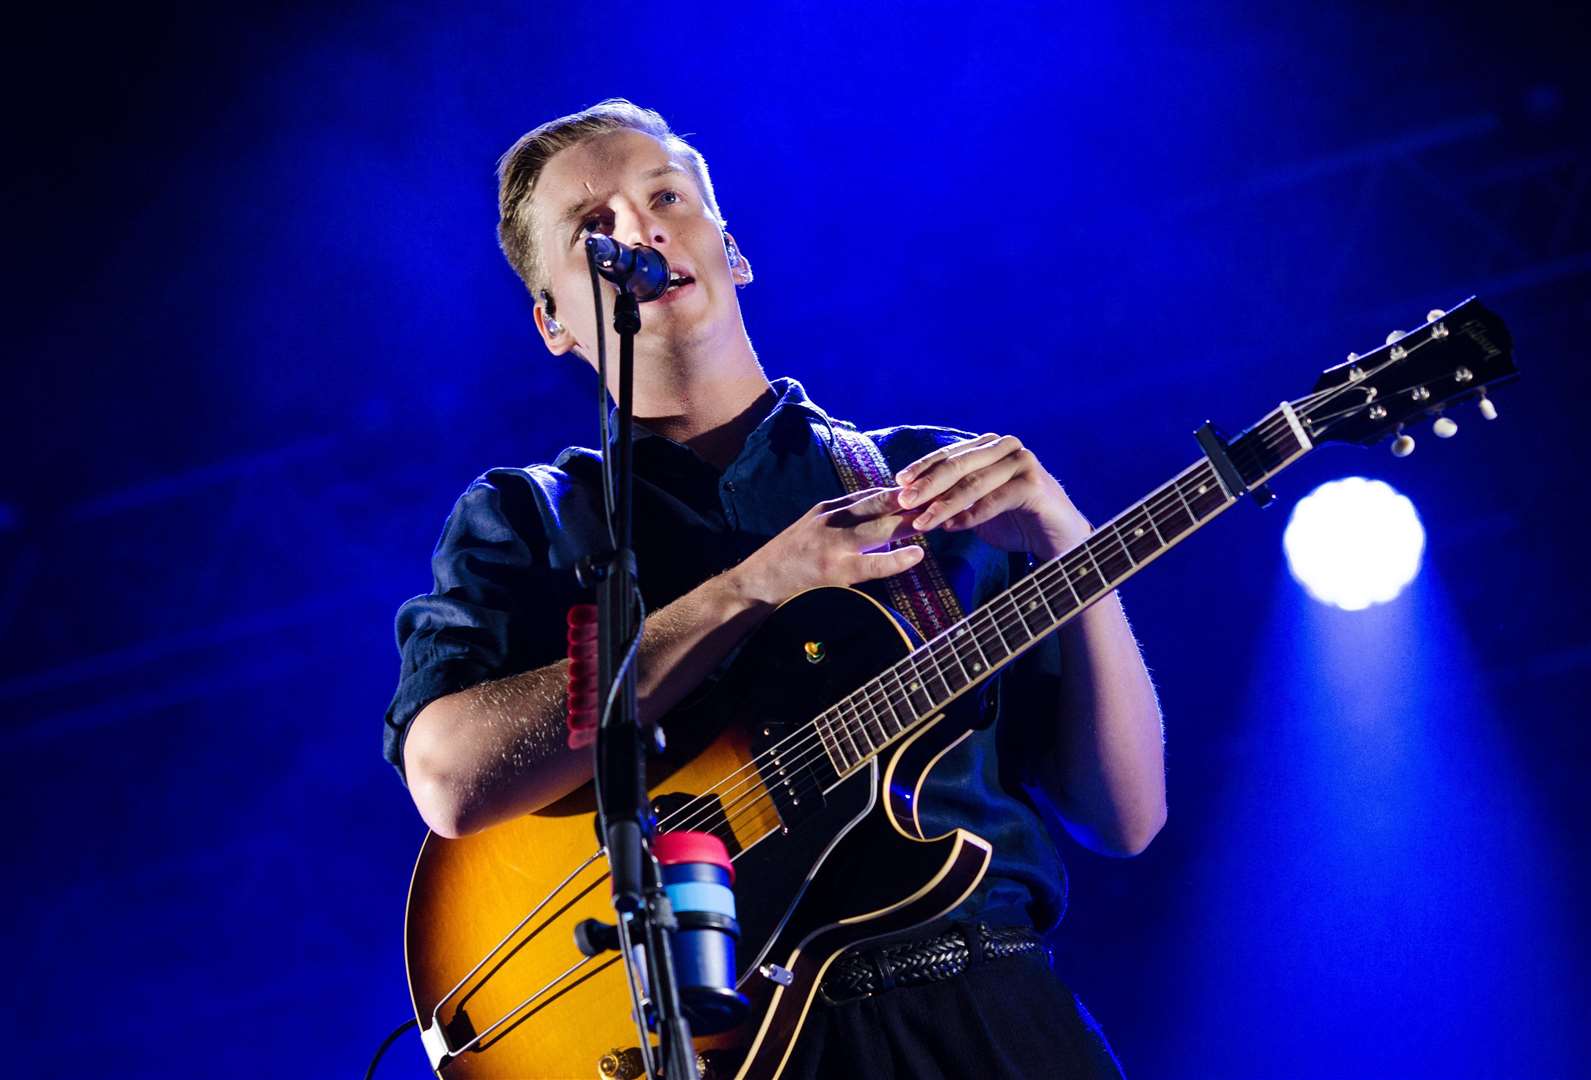 George Ezra is the first music act to be confirmed